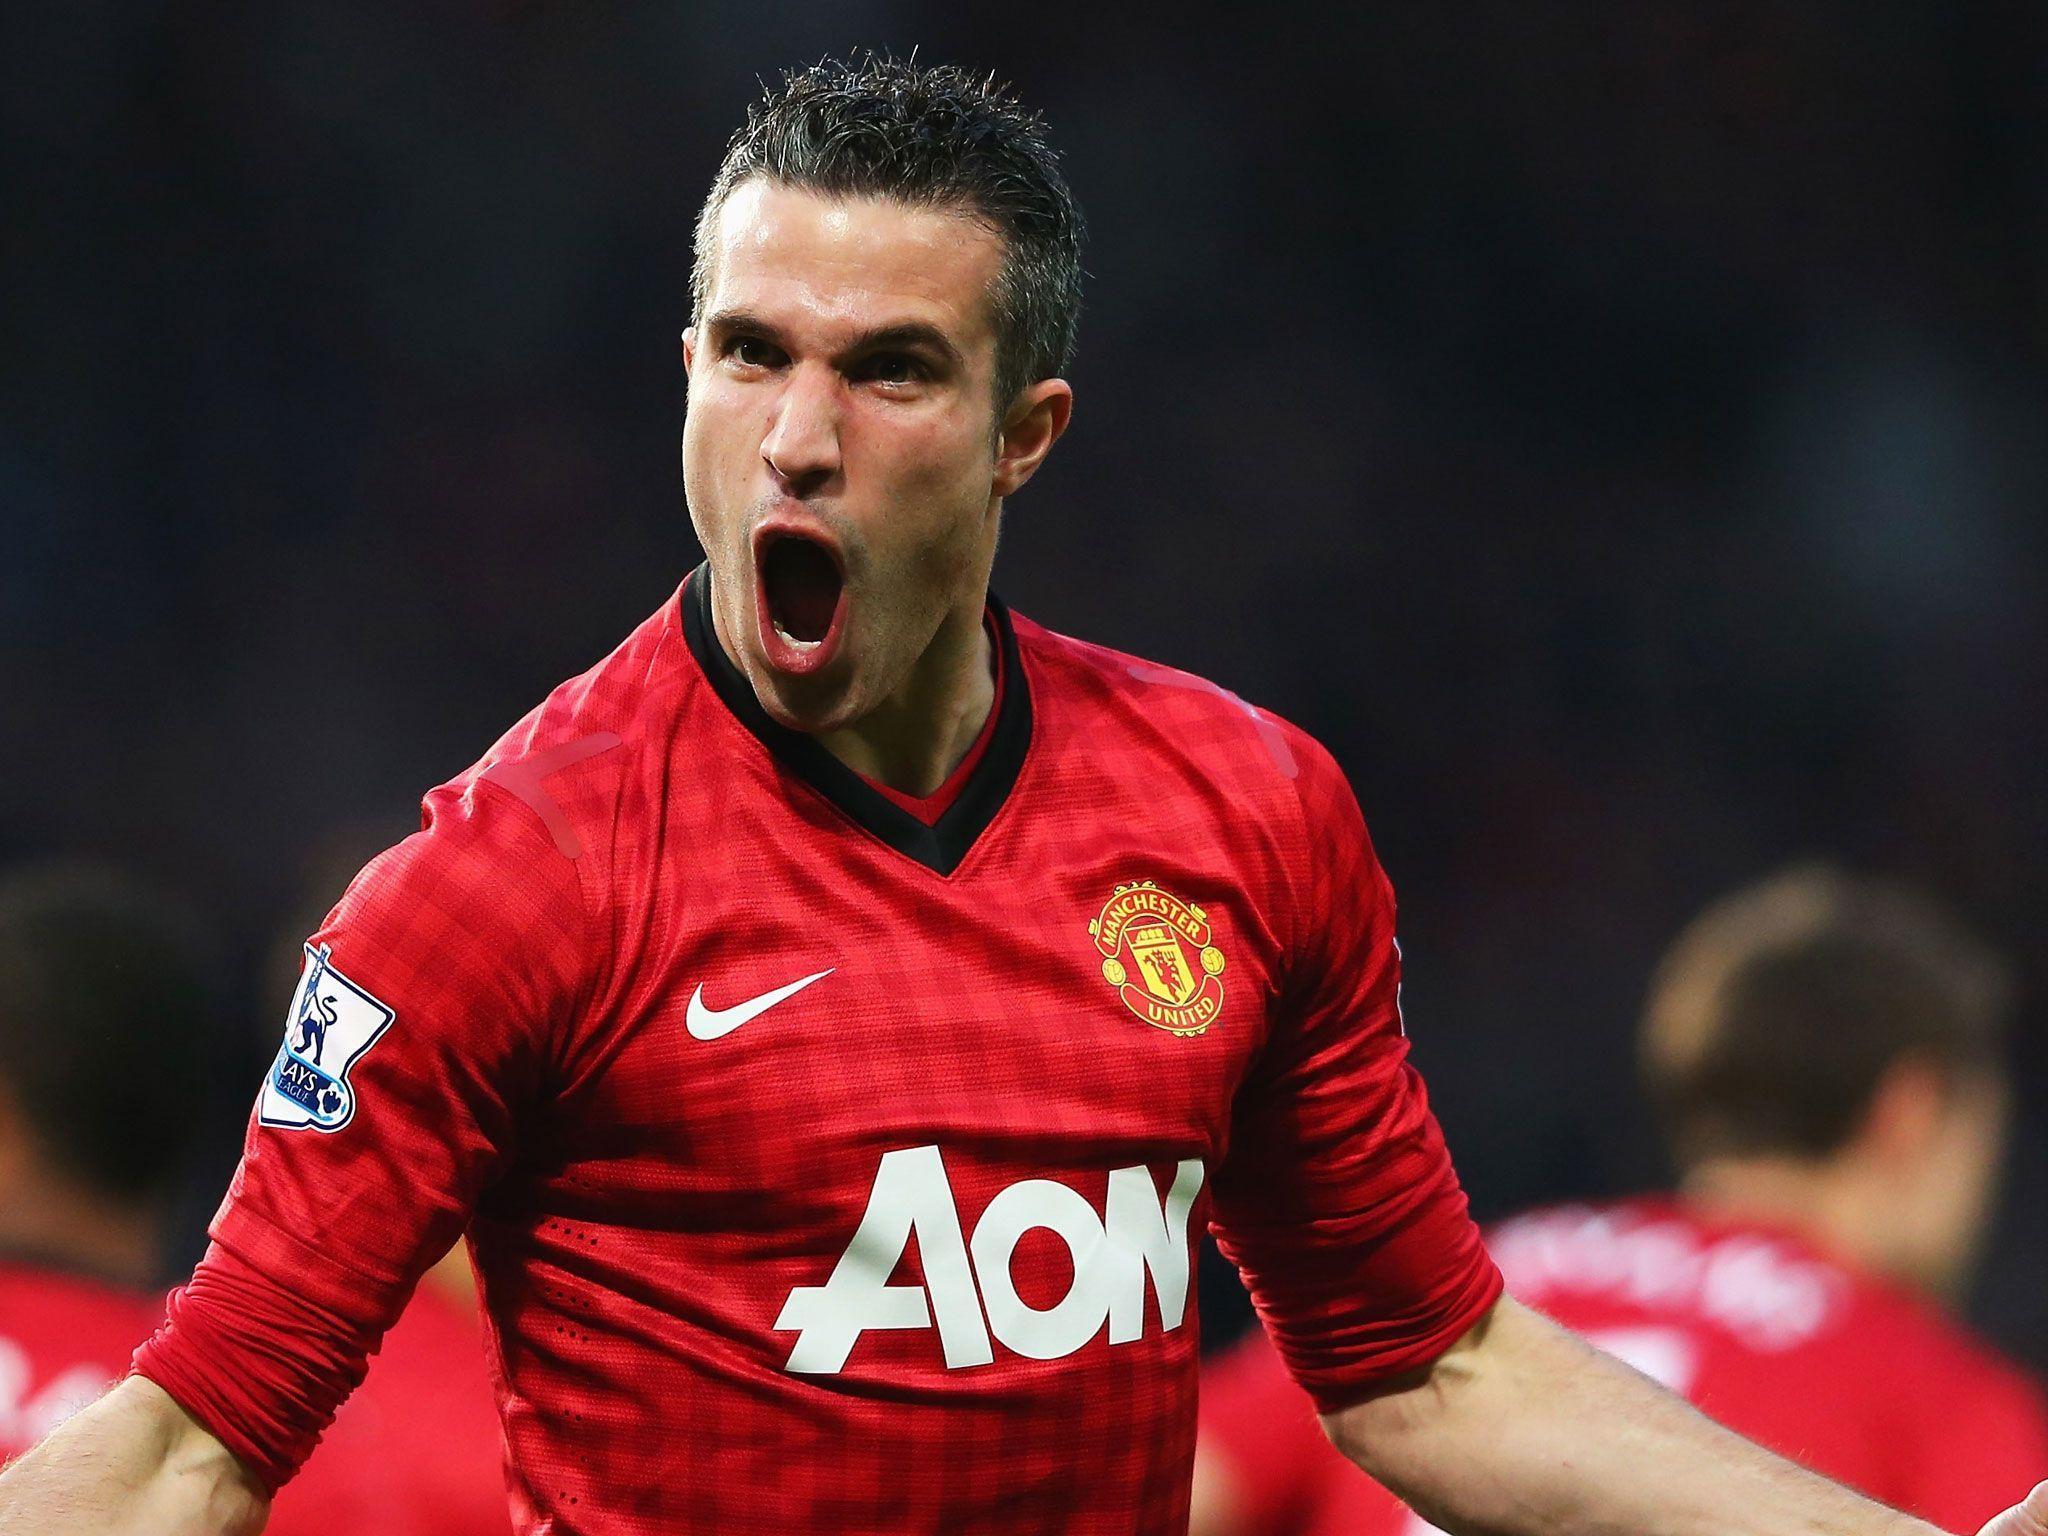 Van Persie Thanks Arsenal And Manchester United For Their Love